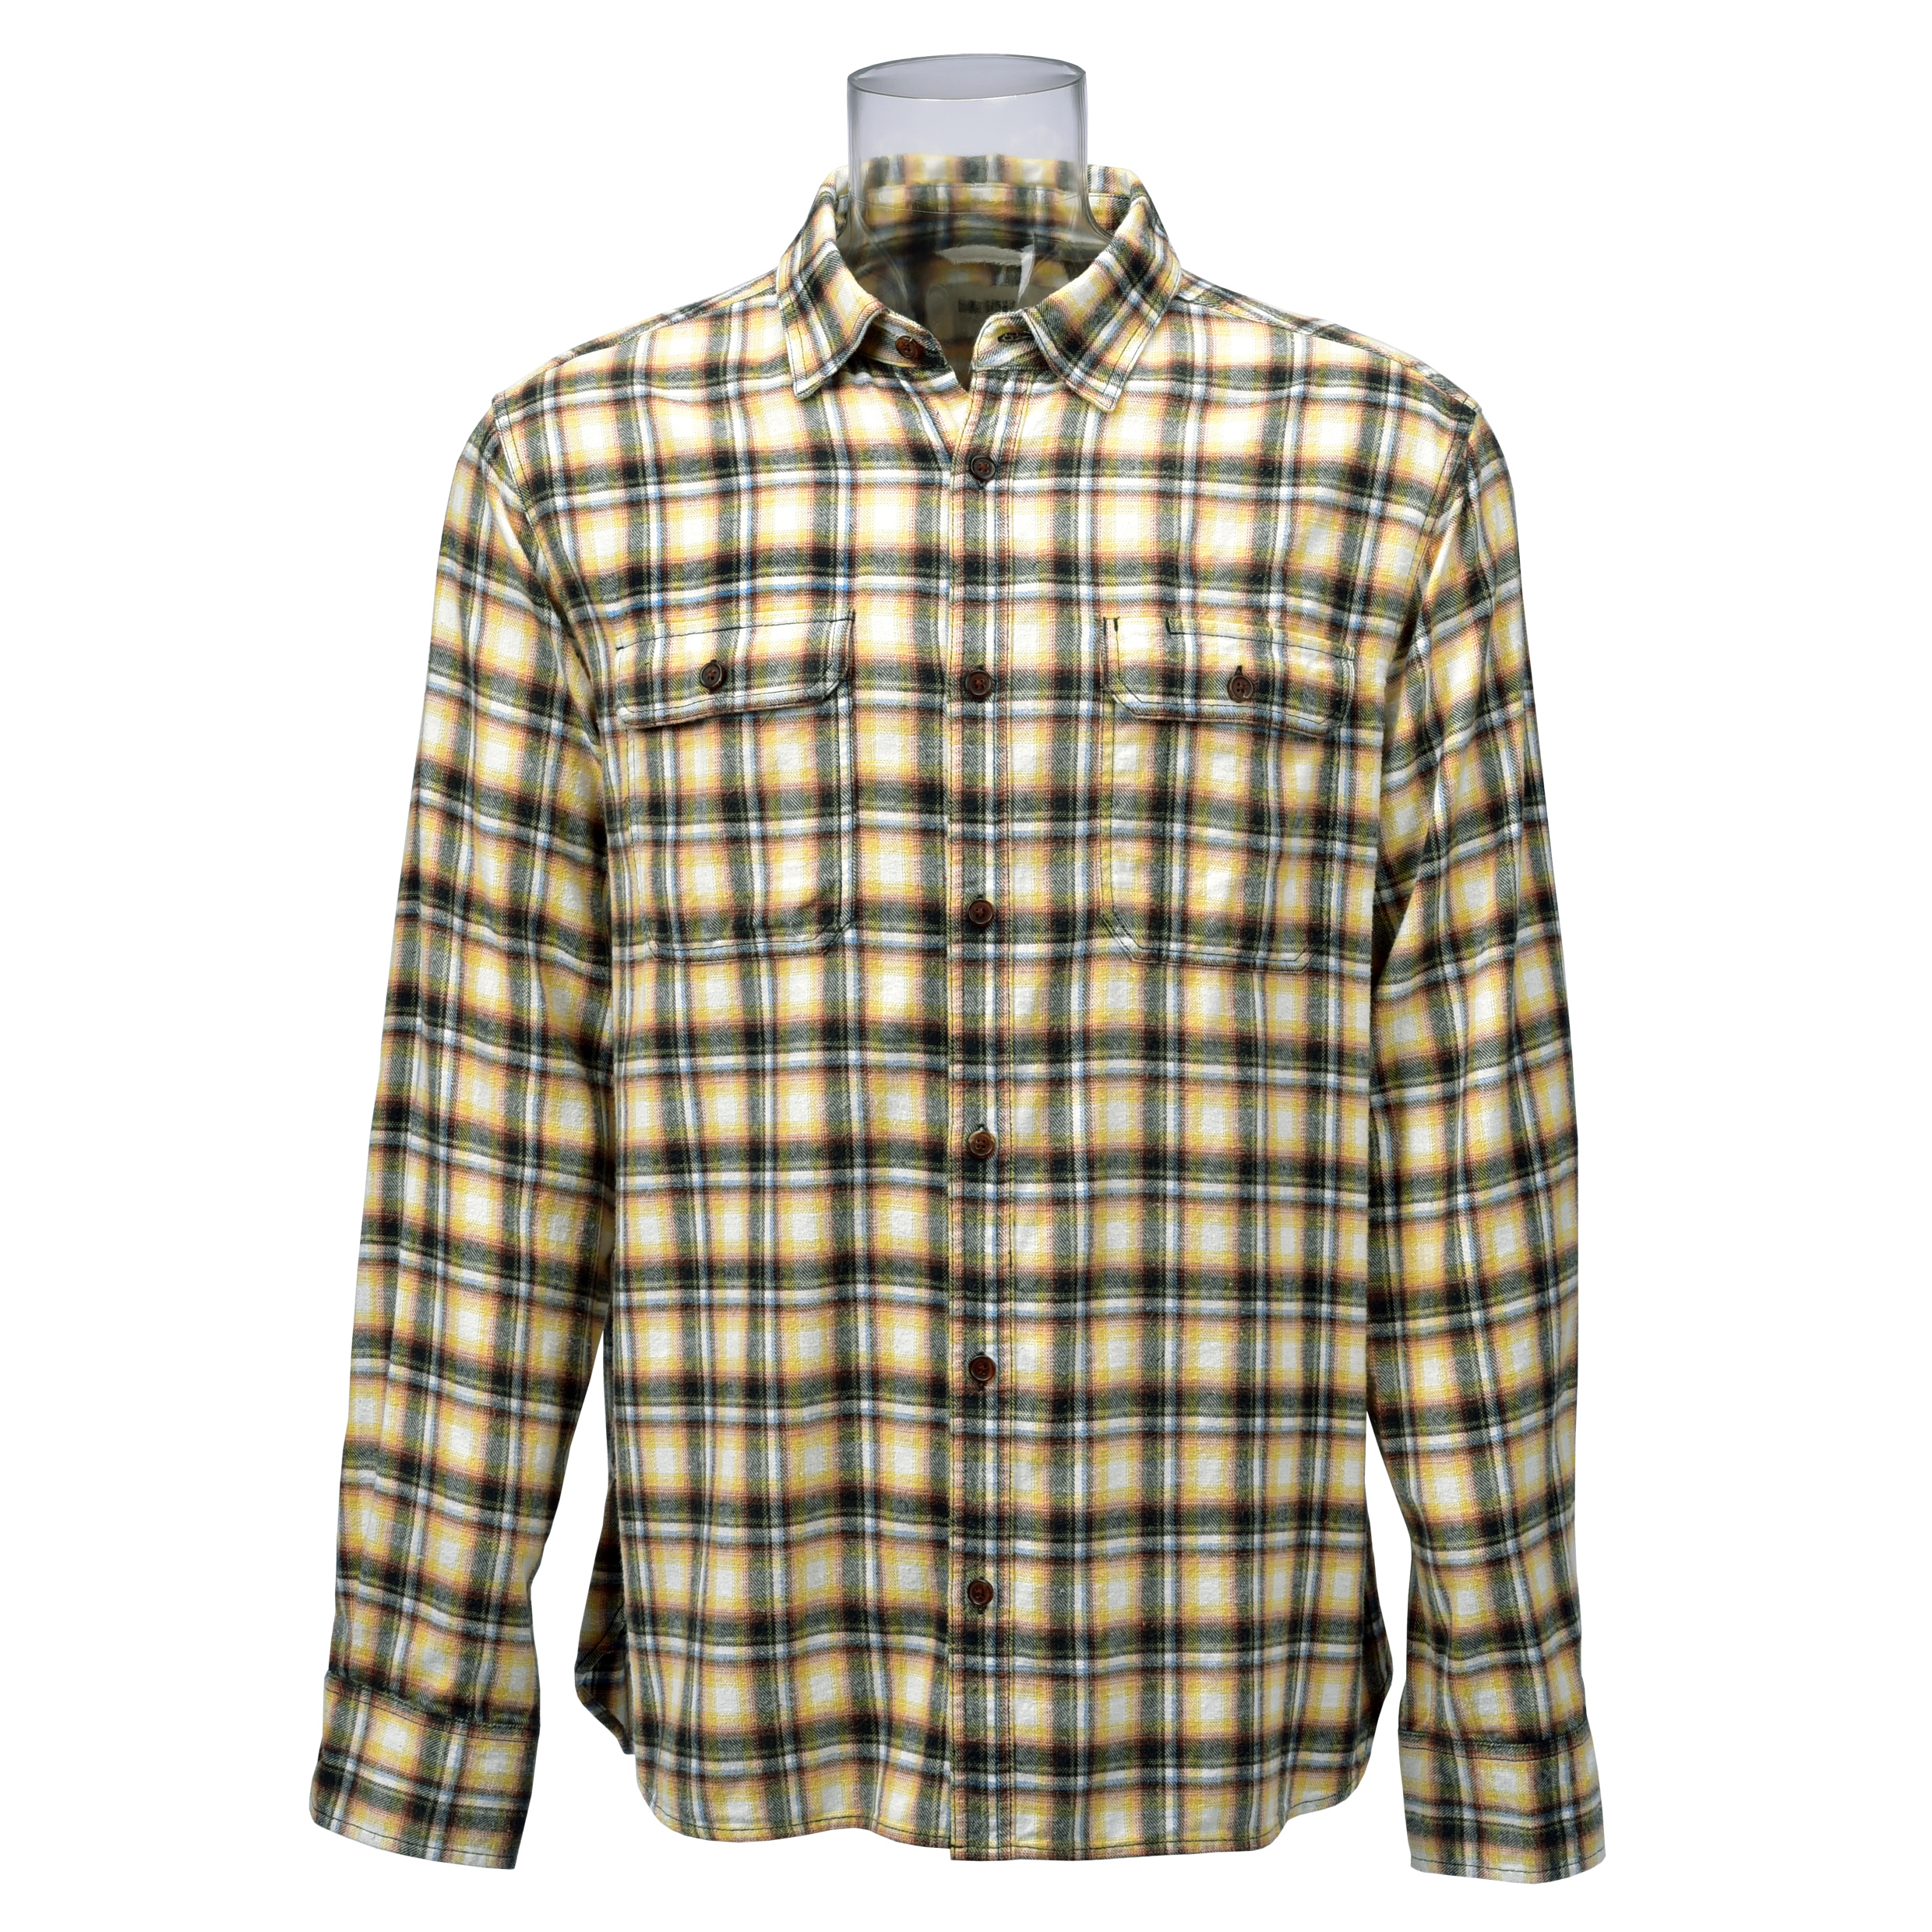 Men’s Shirt 100% Cotton Long Sleeve Yellow and Pink Check Casual Flannel Shirt For Men GTCW106850G1